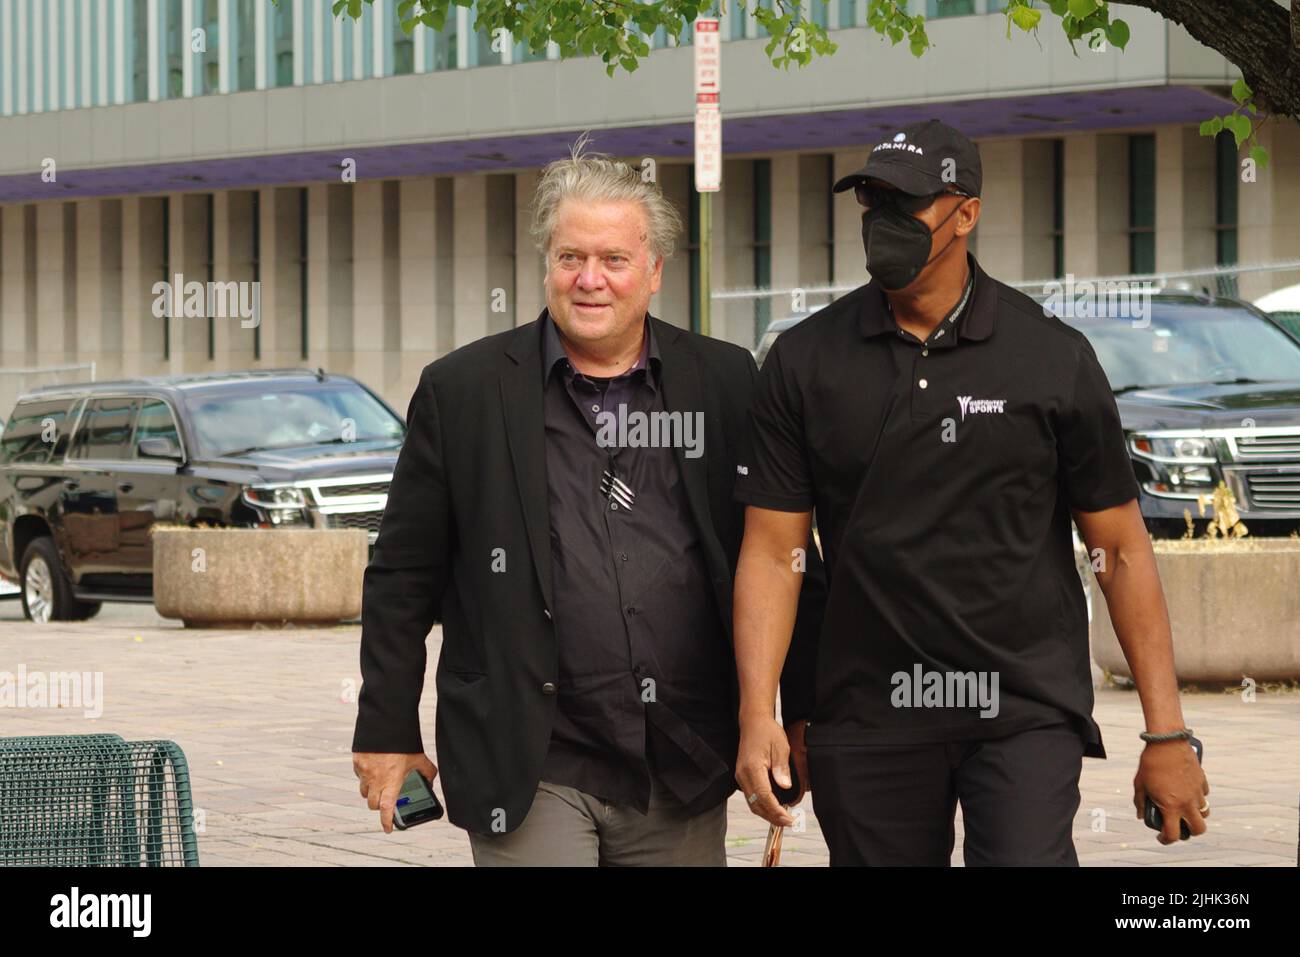 Washington, DC, 19 Jul 2022, Former Trump strategist Steve Bannon arrives for day two of his contempt trial at the E. Barrett Prettyman Federal Courthouse. Credit: Philip Yabut/Alamy Live News Stock Photo